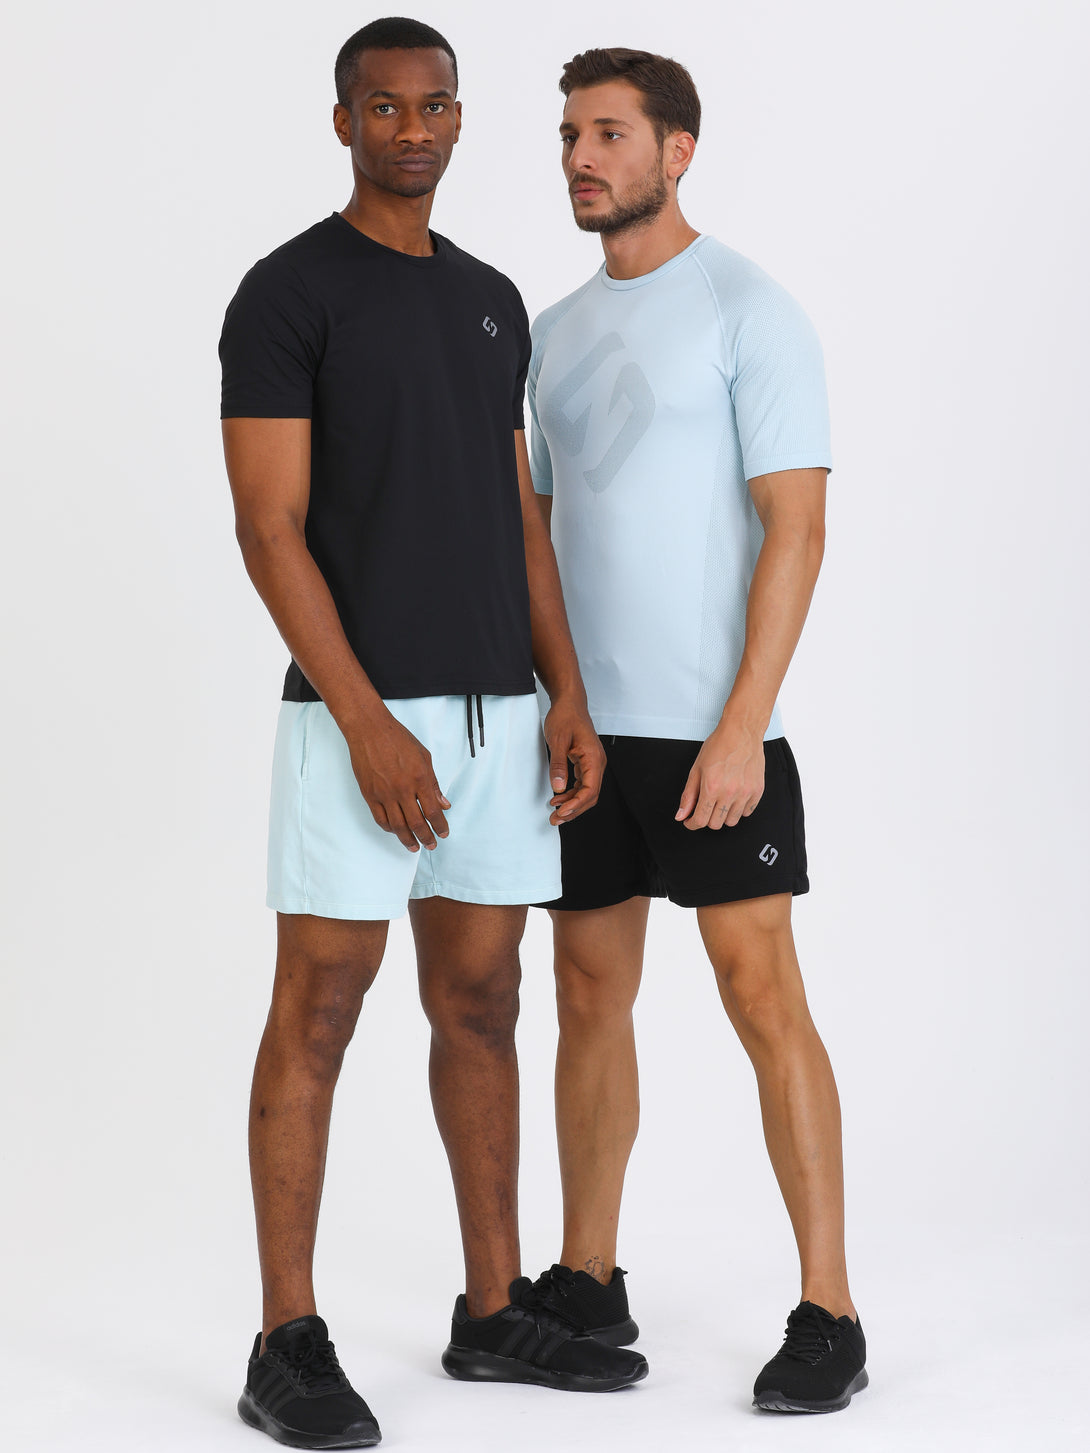 A Man Wearing Baby Blue Color Essential Mens Workout Shorts